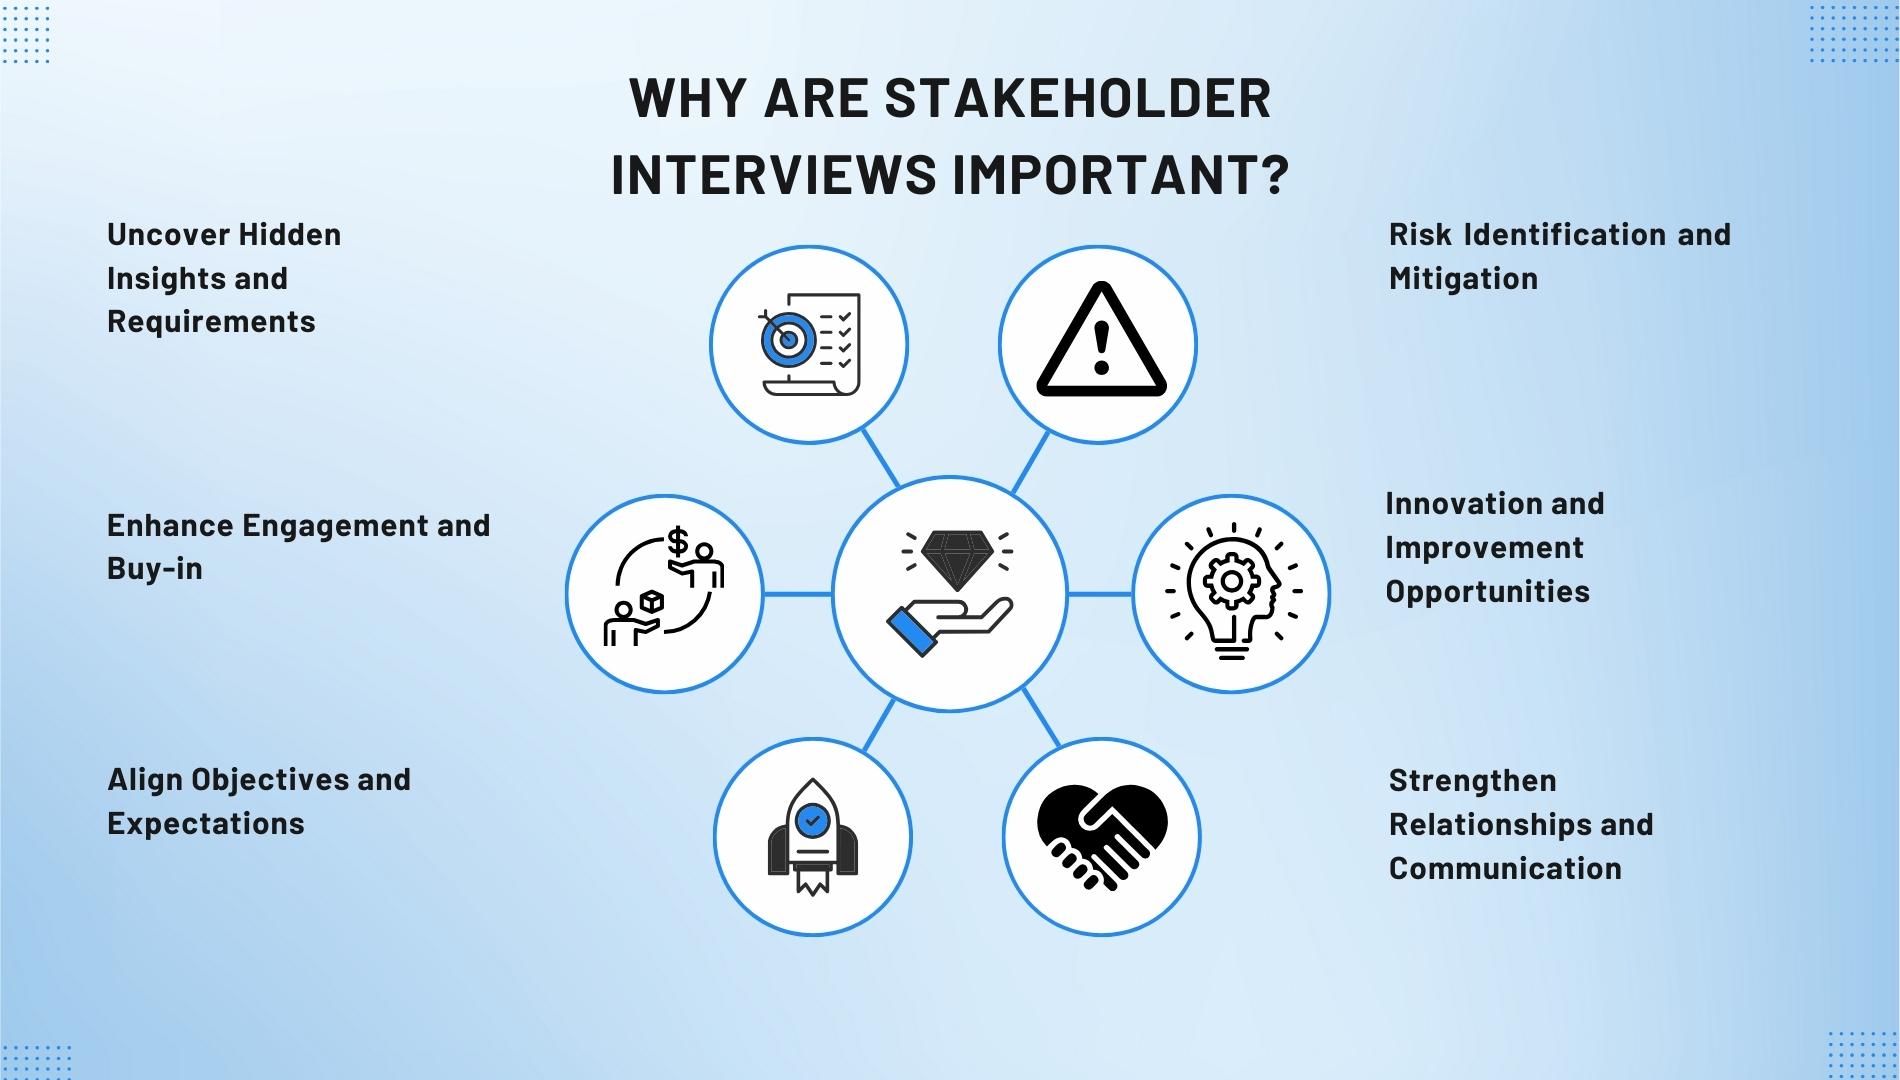 Why are stakeholder interviews important